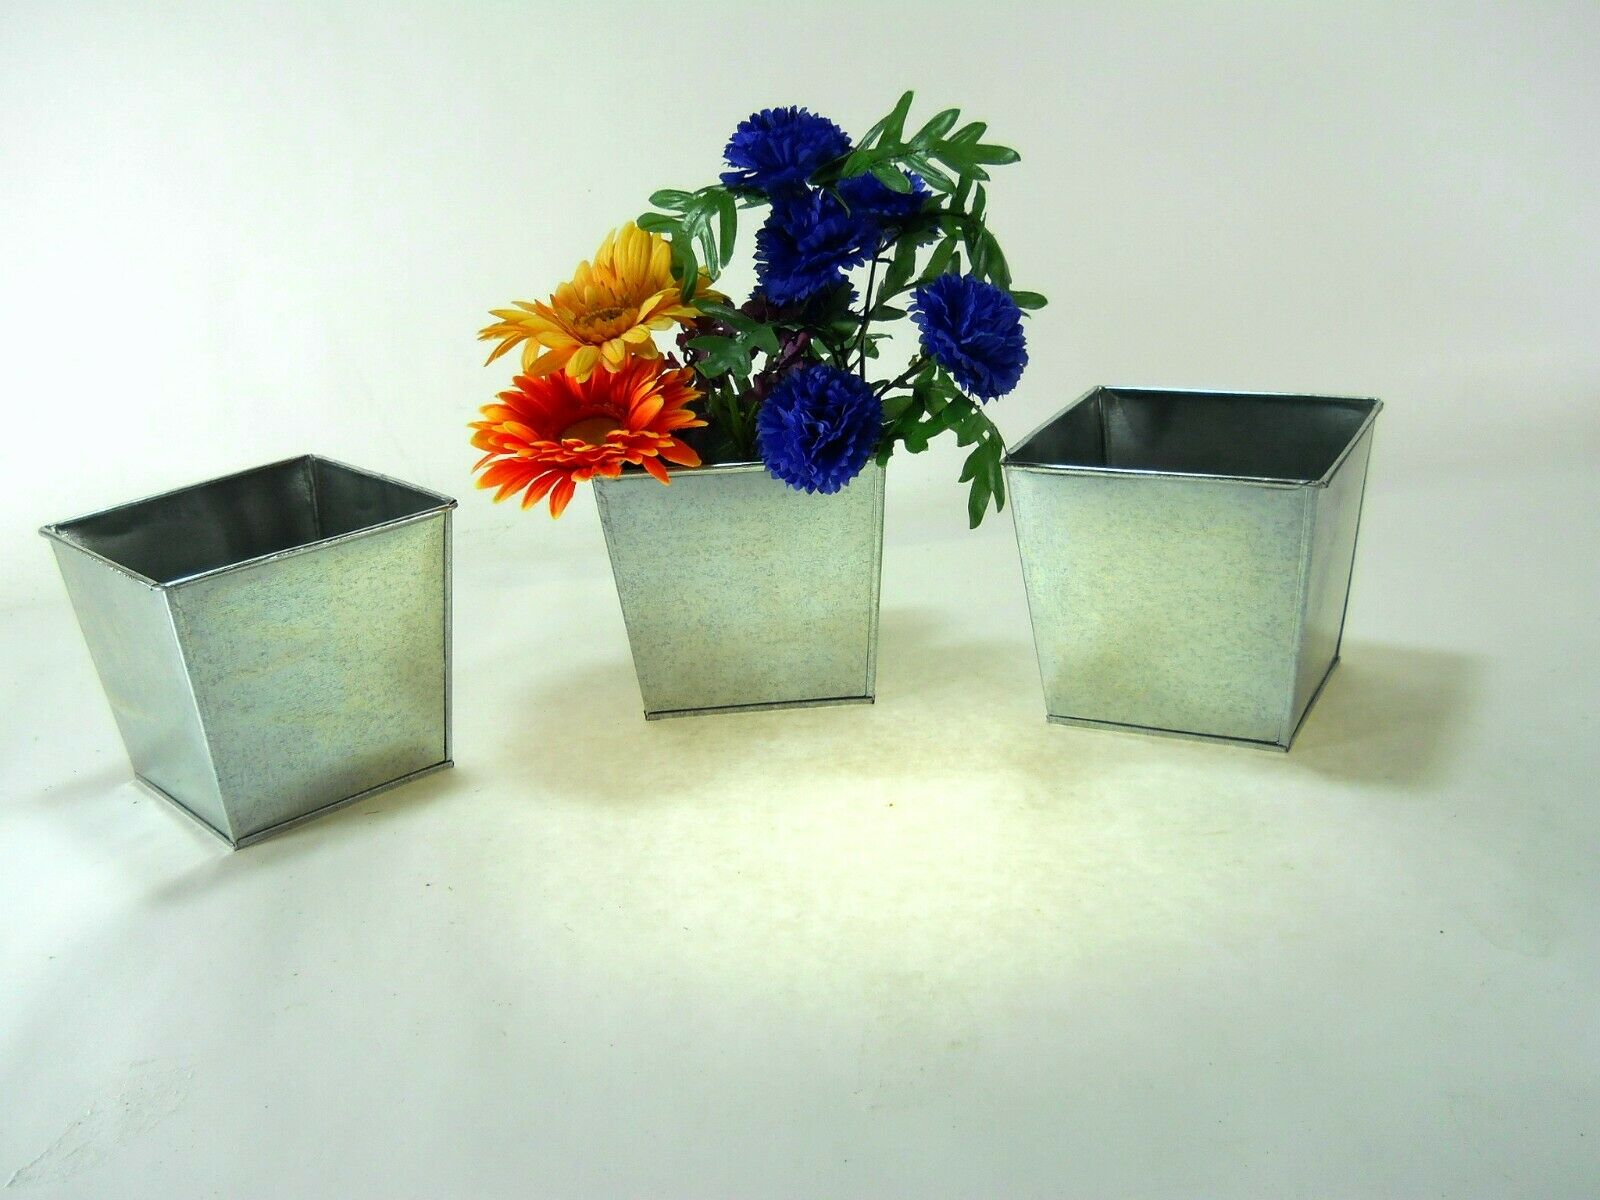 3 pc Square Galvanized Pots NOT waterproof 5x5x4 1/2 tall. Baskets, Pots & Window Boxes Carvers Olde Iron 